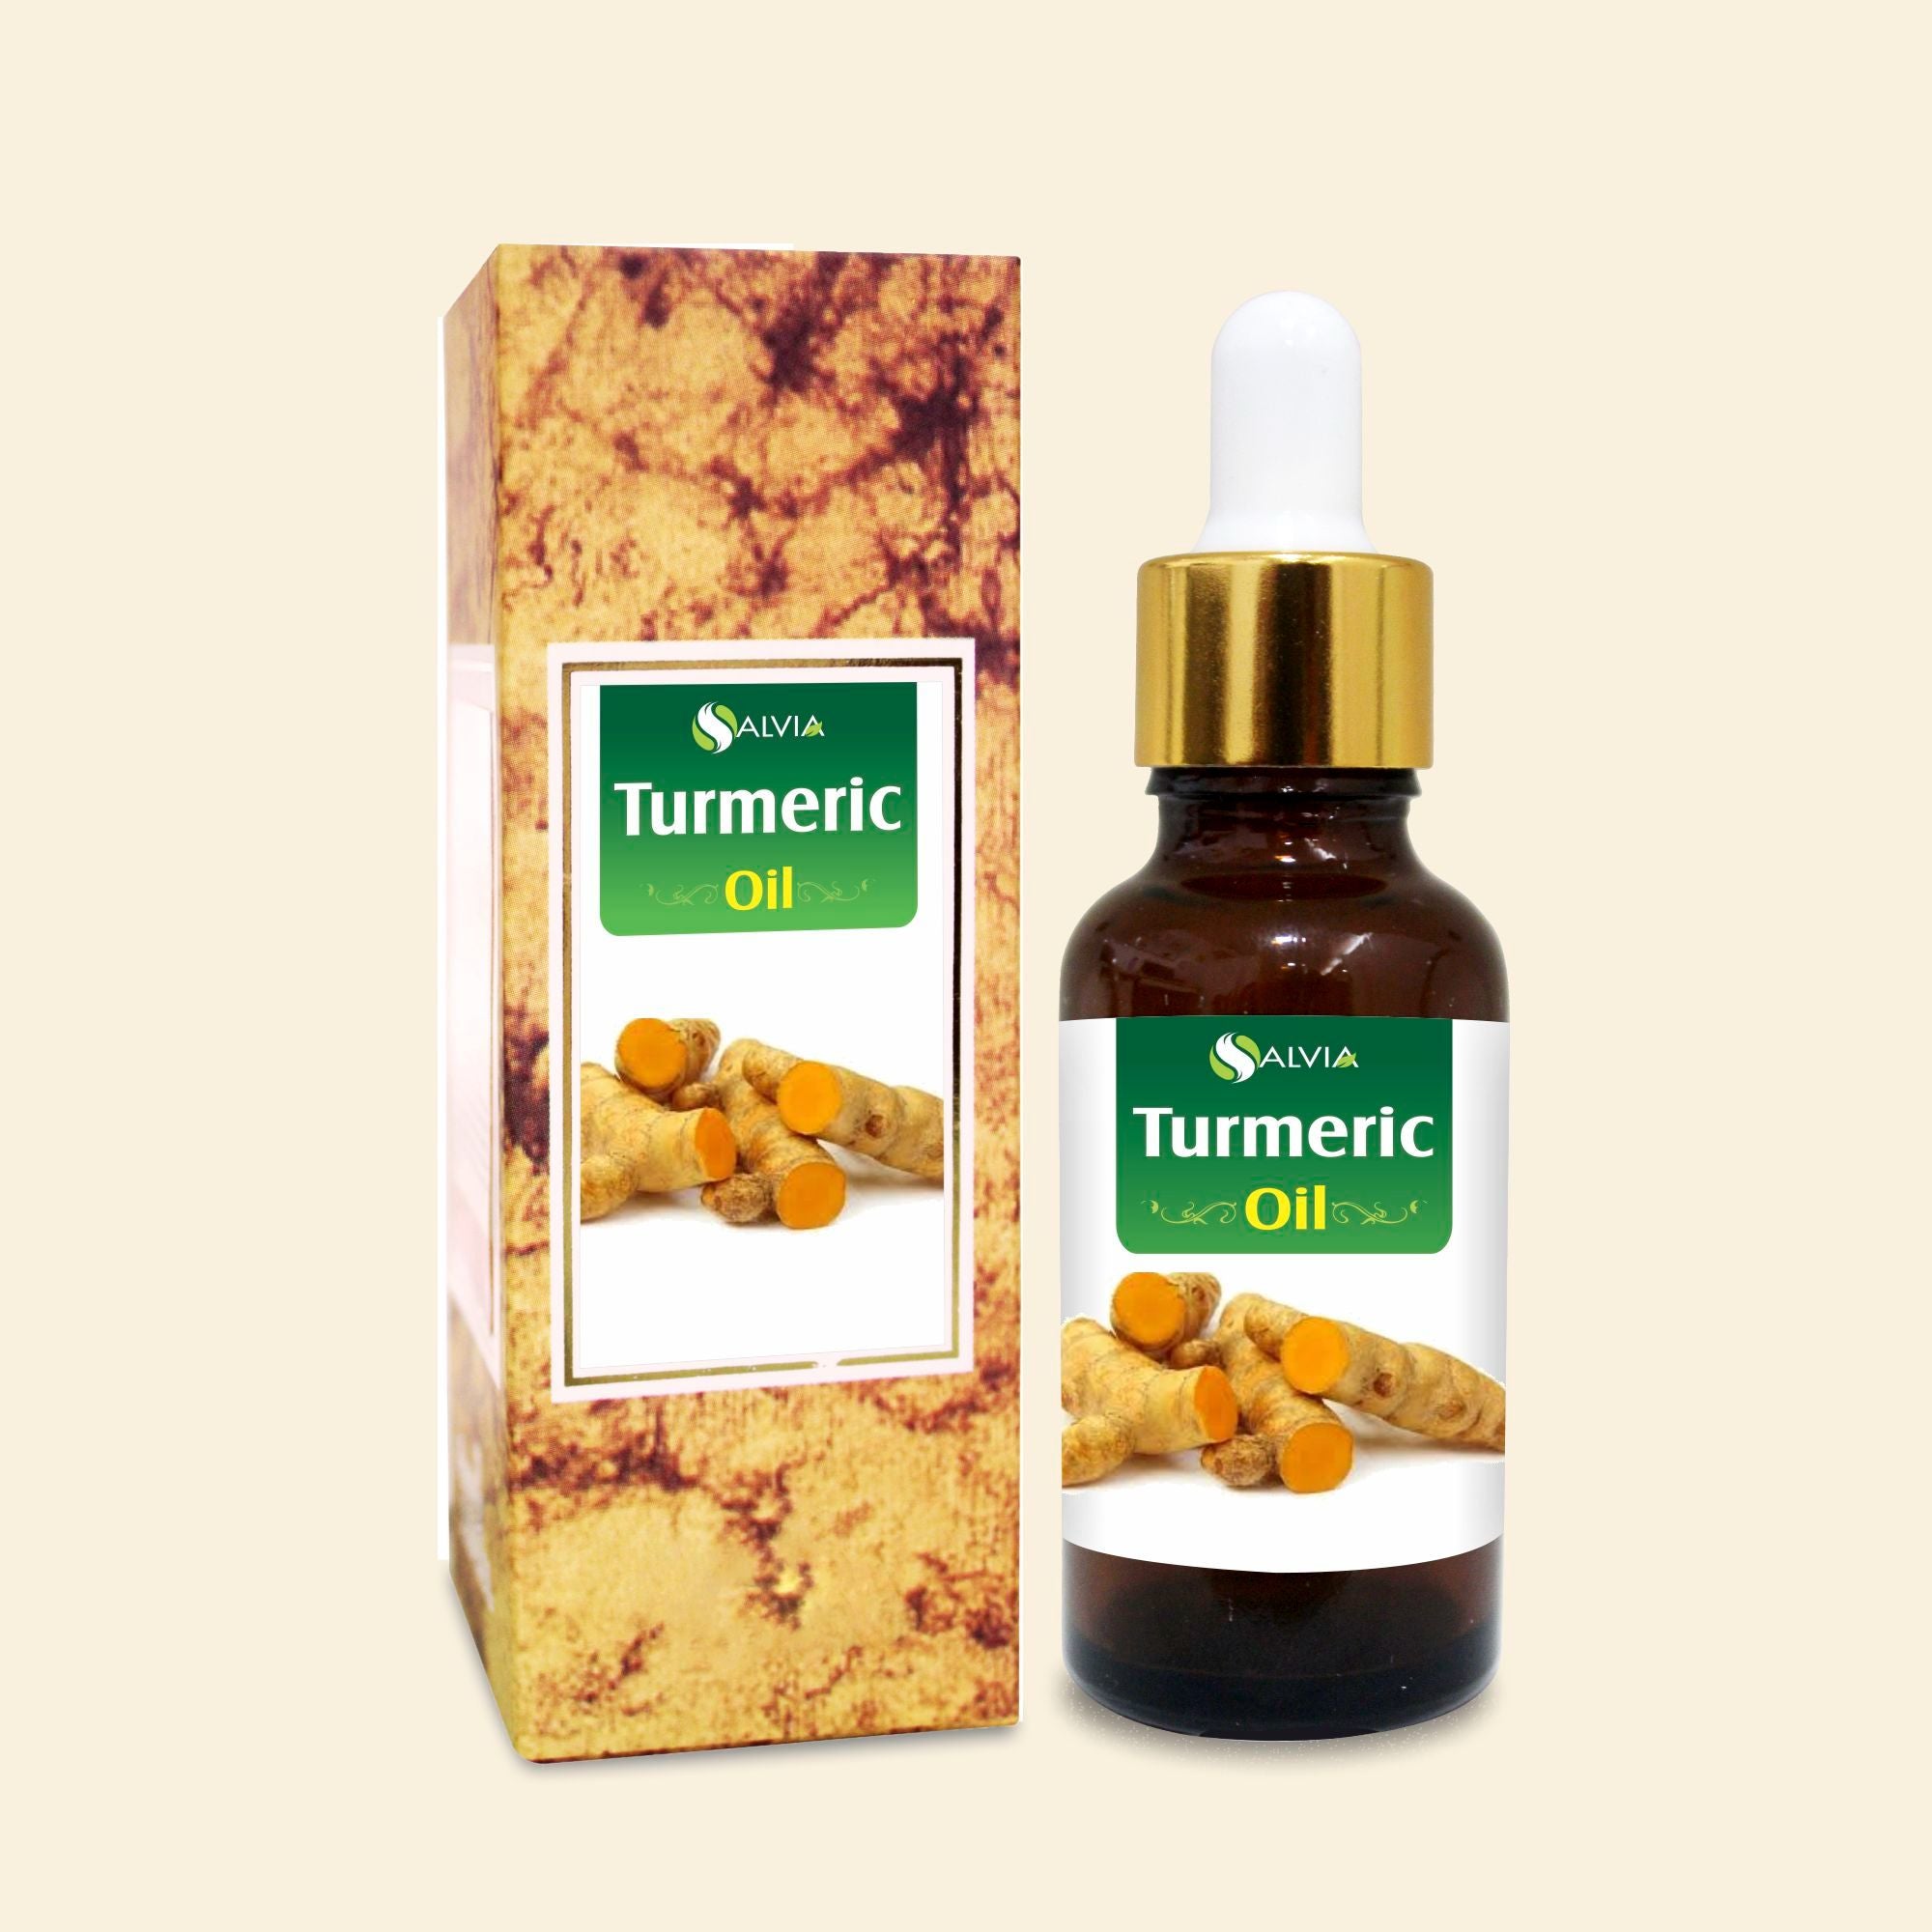 Salvia Natural Essential Oils Turmeric Oil for Skincare and Hair care